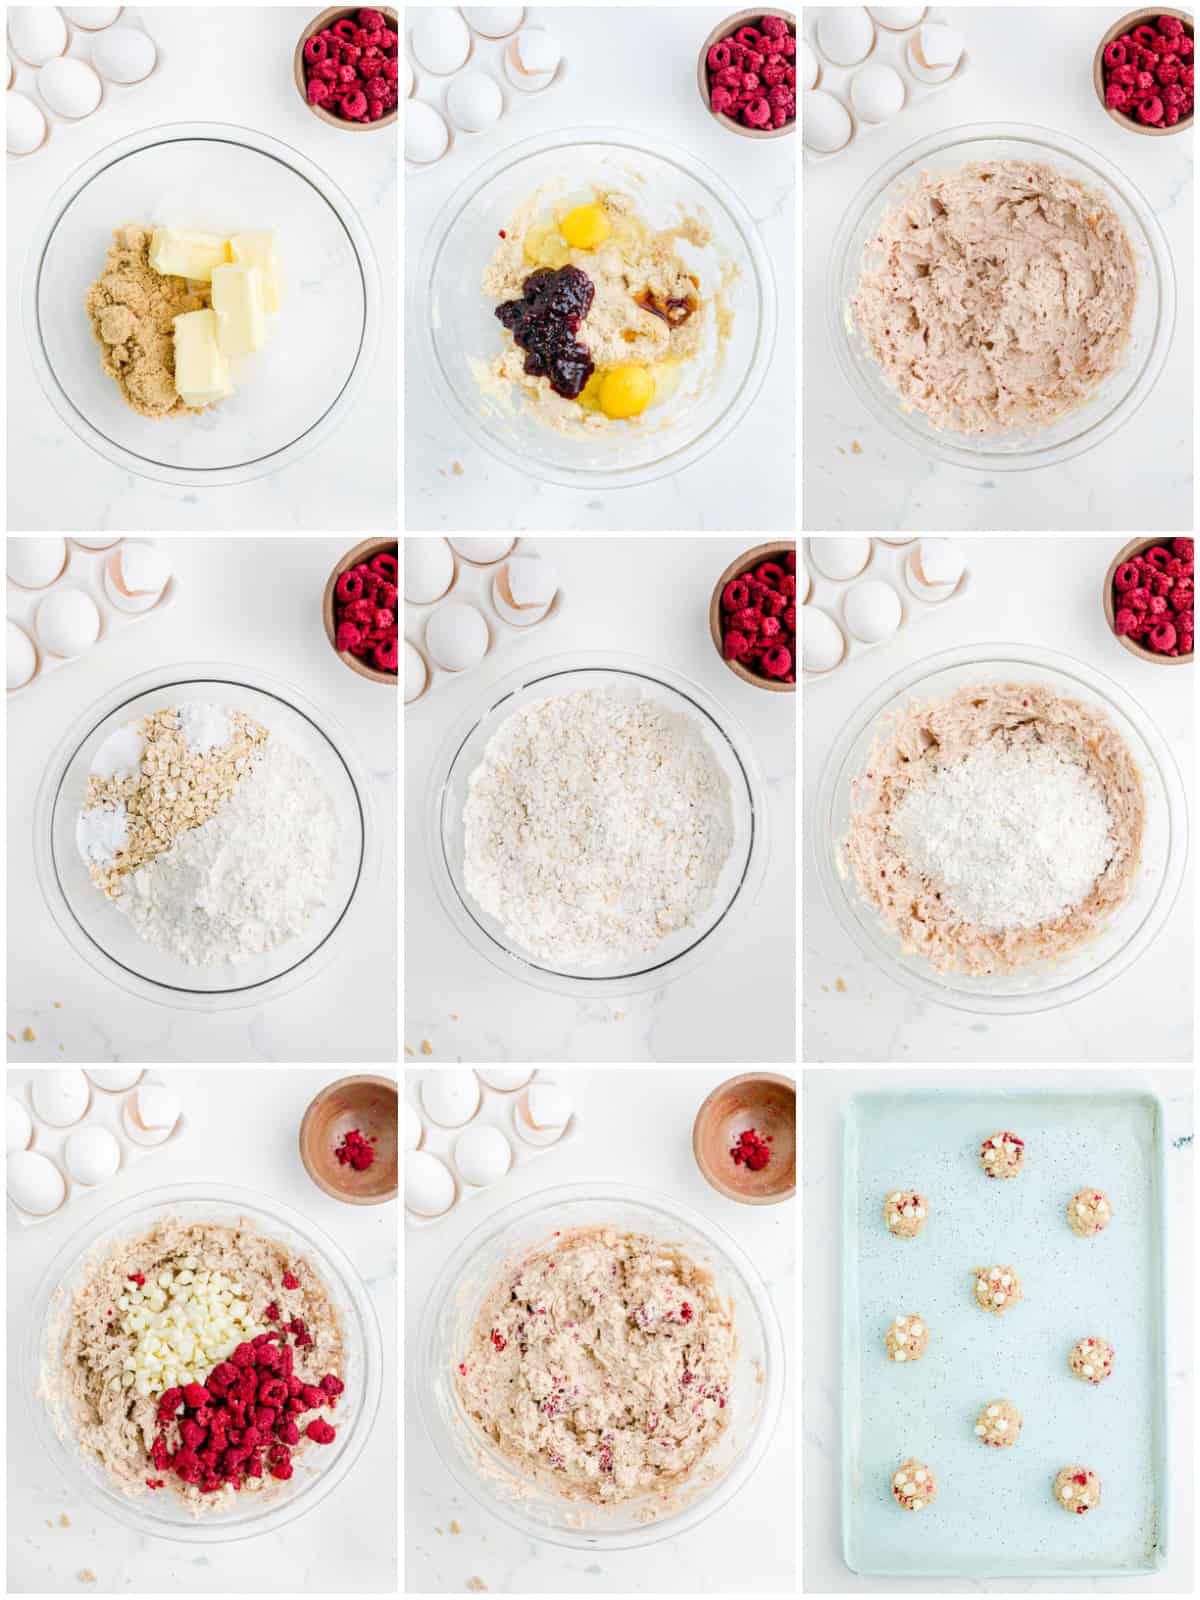 Step by step photos on how to make Oatmeal Raspberry White Chocolate Cookies.